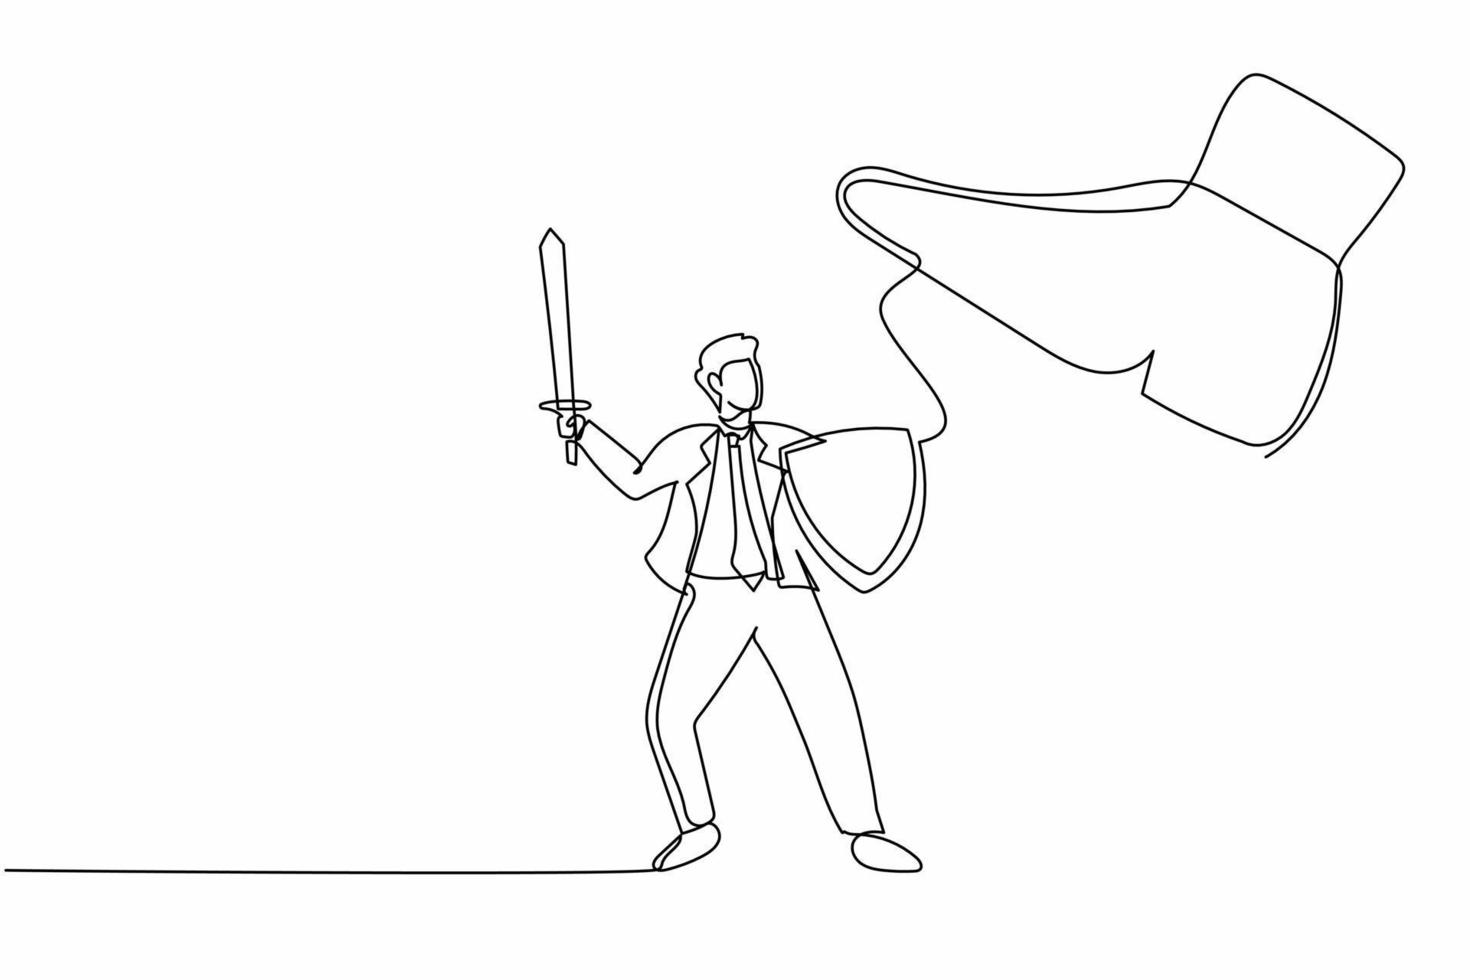 Single continuous line drawing active businessman fight to giant foot with shield and sword. Manager against big shoe stomp with weapon. Minimalism metaphor. One line draw design vector illustration